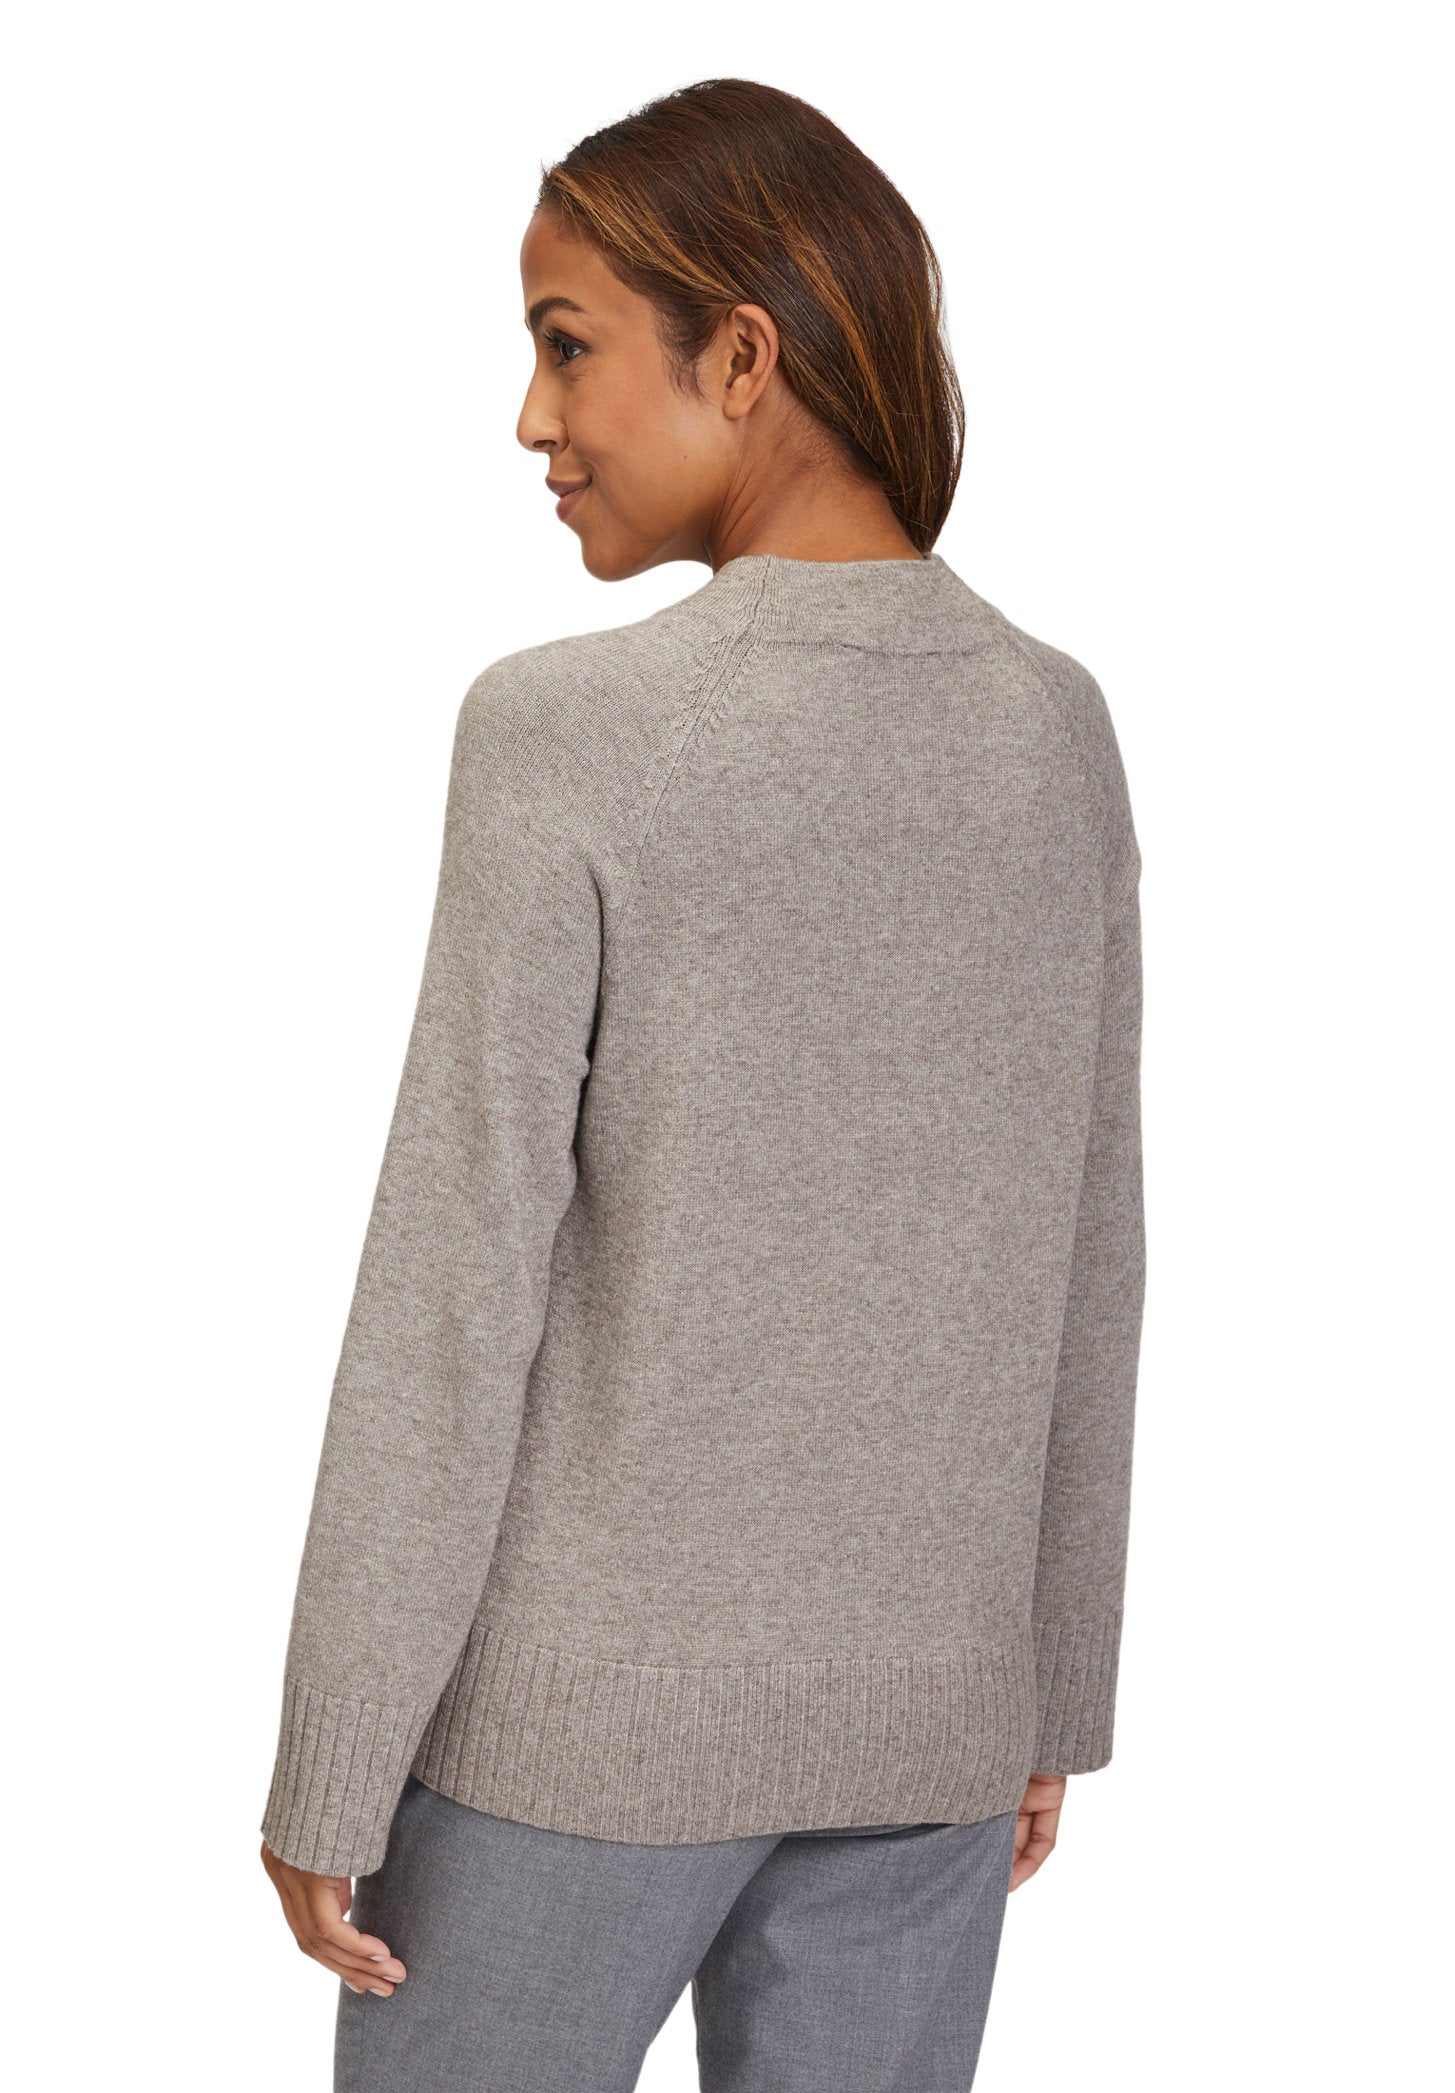 Grey Knitted Sweater_5988-1026_7717_04